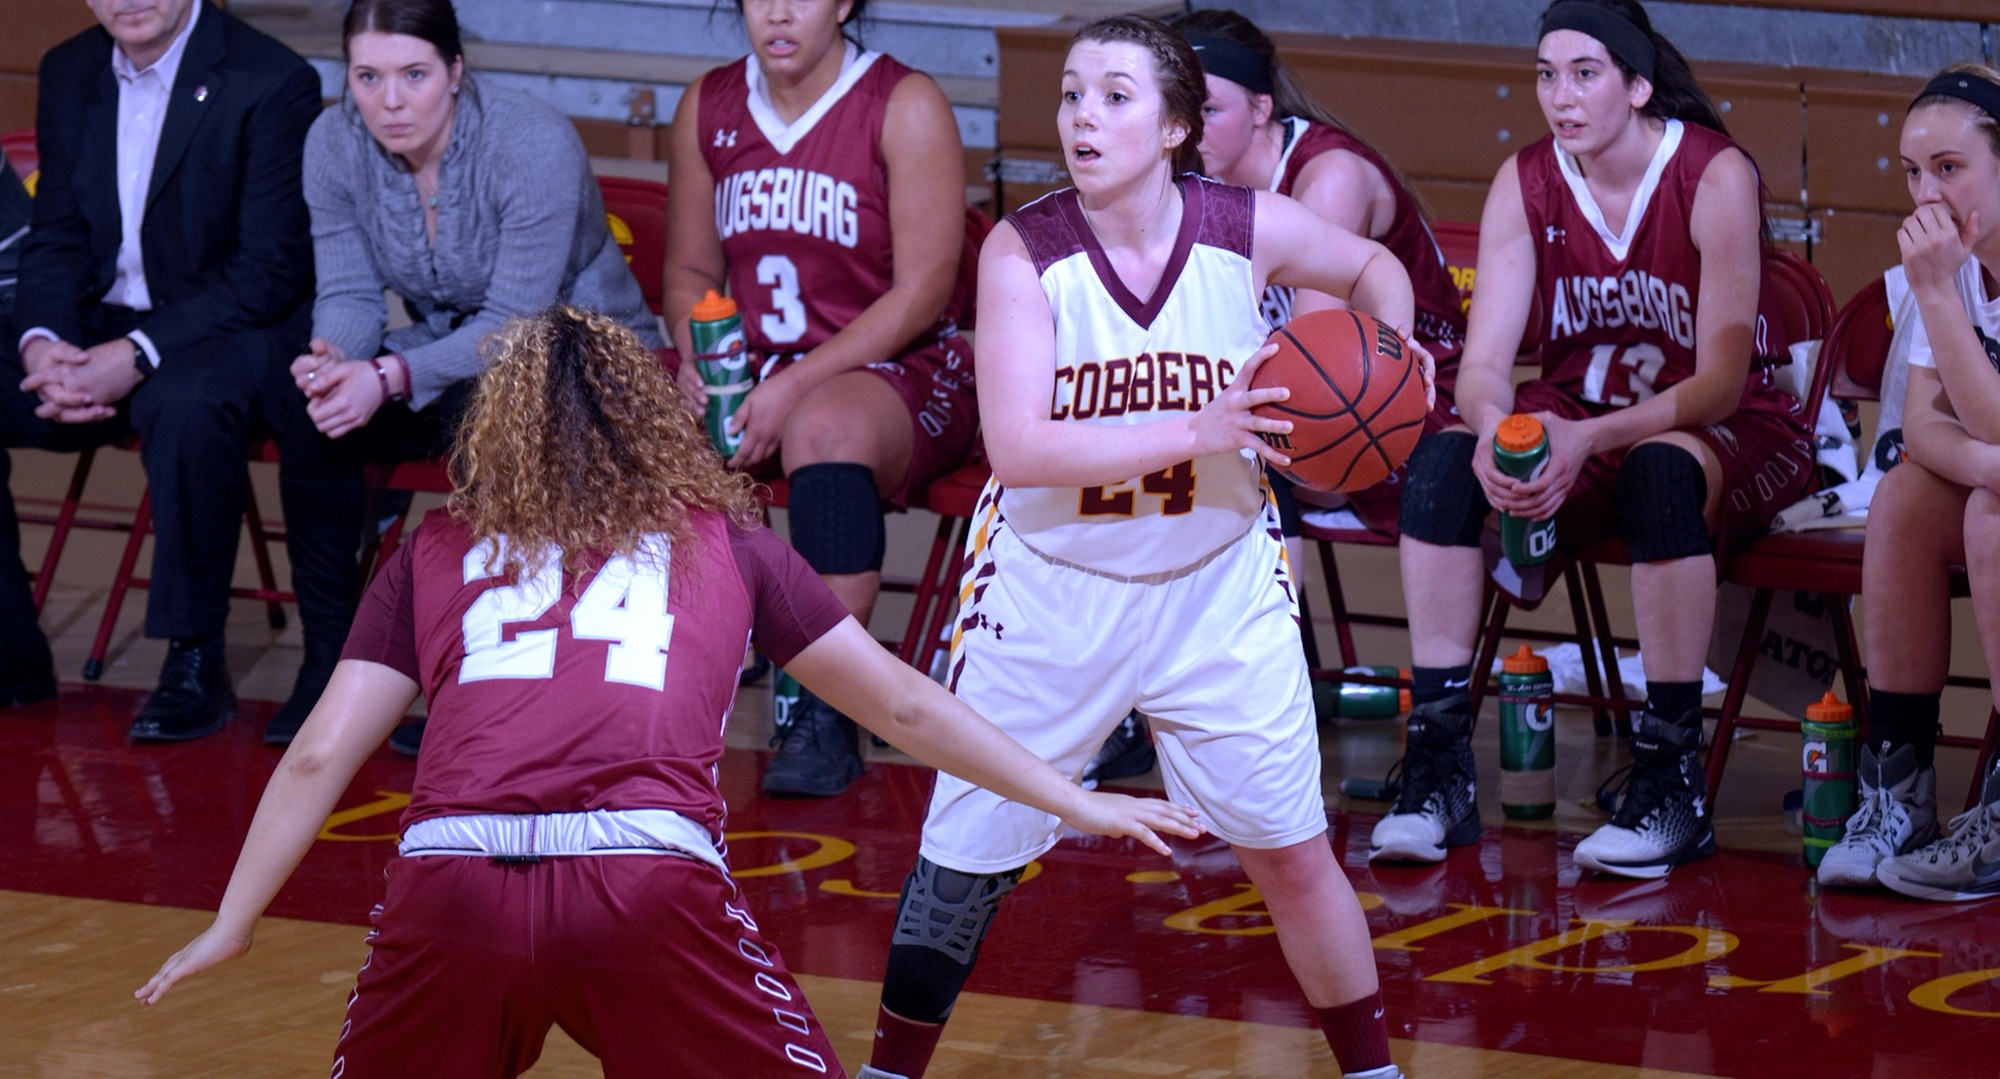 Junior Casidy Rahman looks to make a pass inside during the Cobbers' game with Augsburg. She finished with 11 points, five rebounds and two steals.